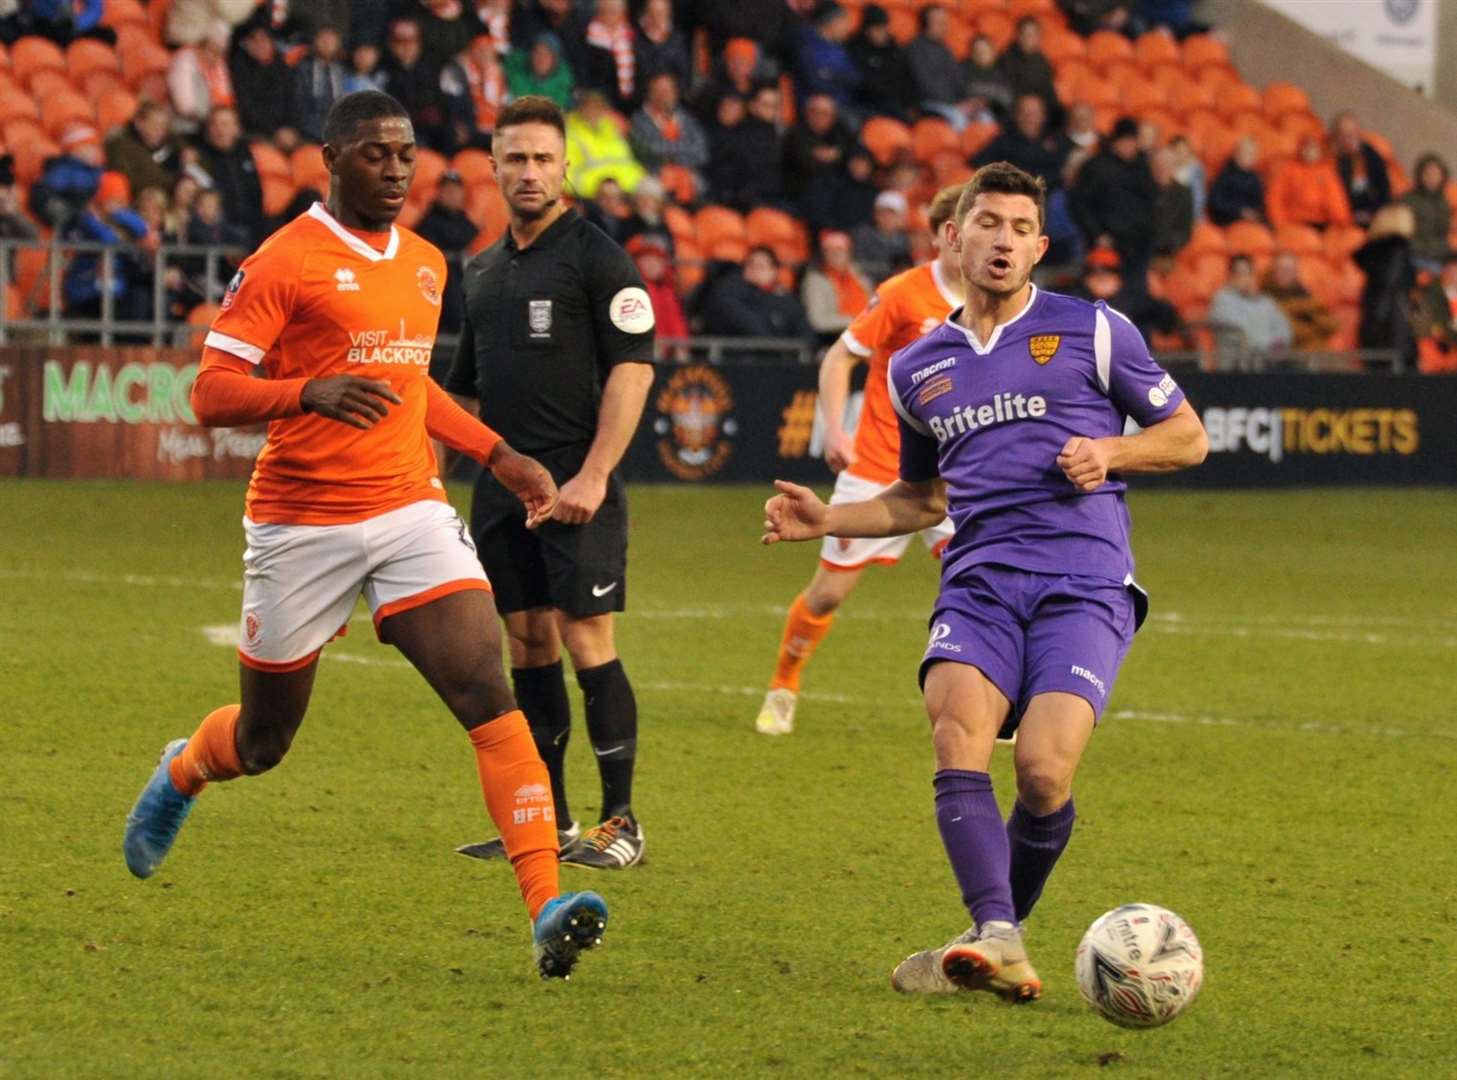 Zihni Temelci made his Maidstone debut in the FA Cup second-round tie at Blackpool Picture: Steve Terrell